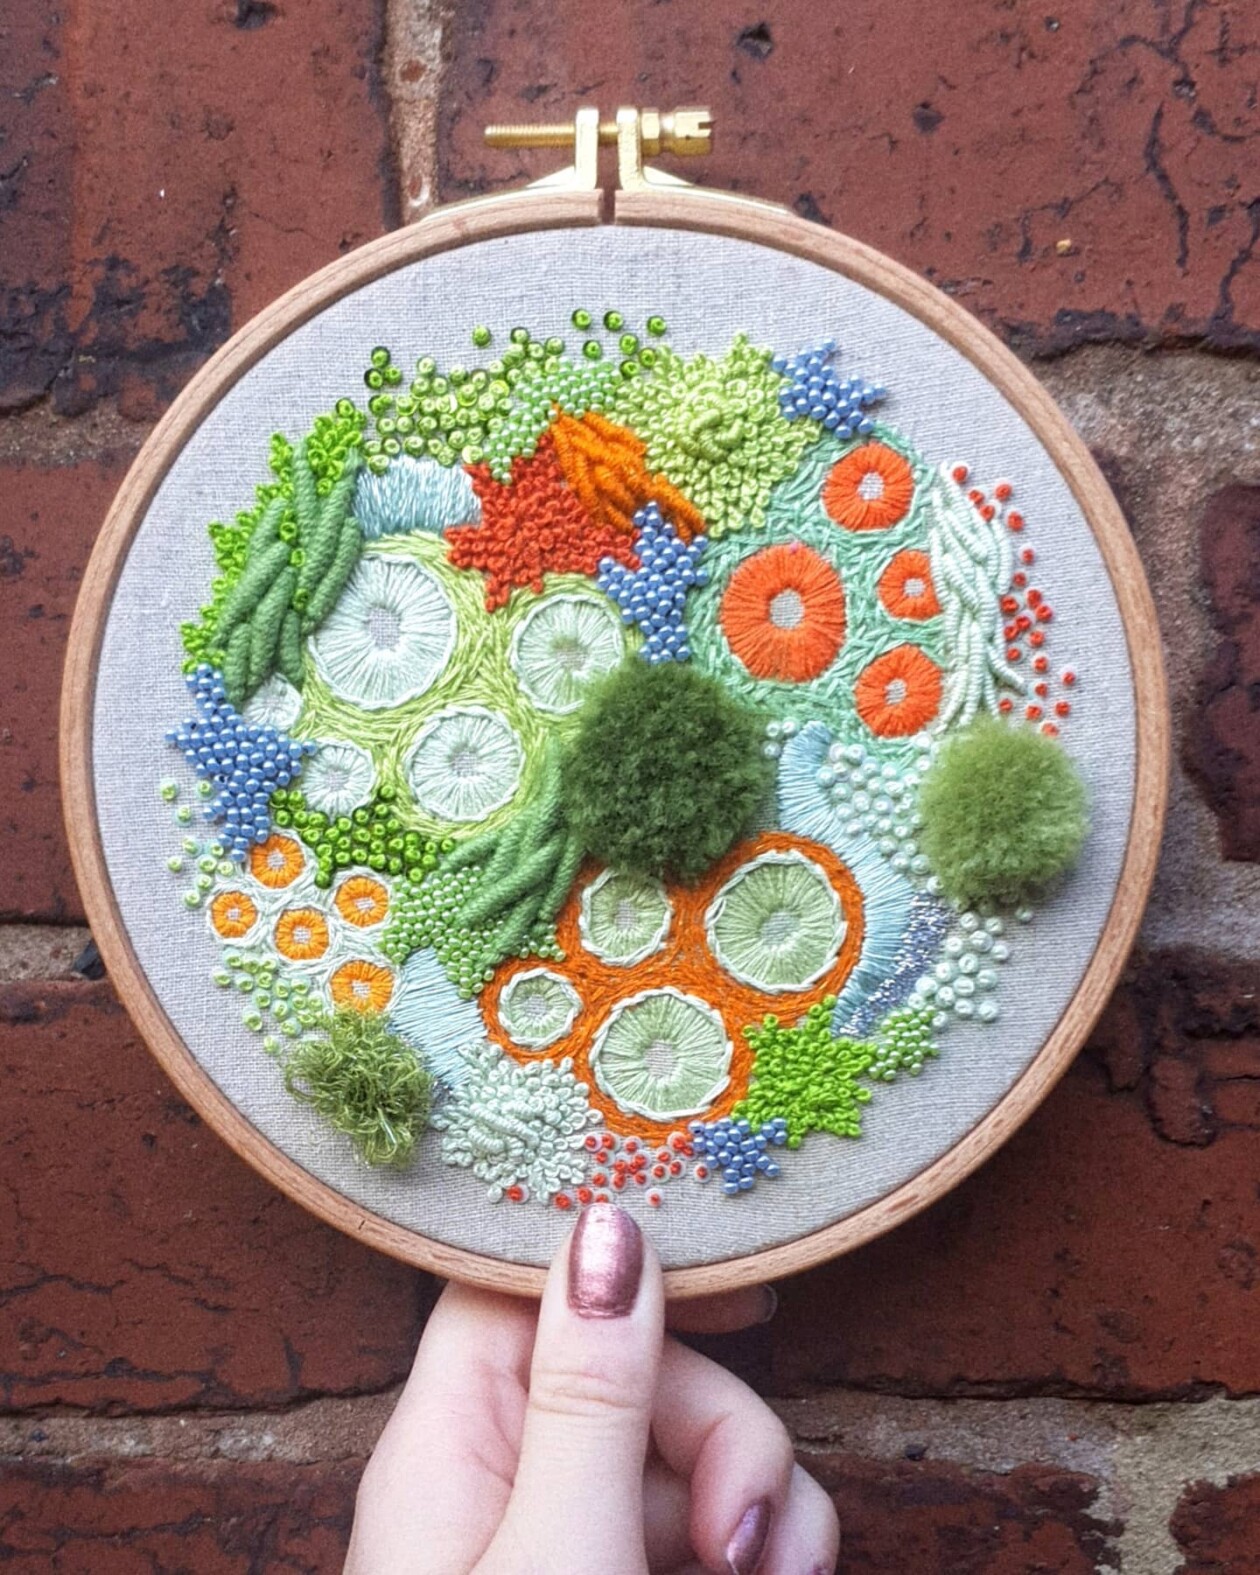 Marvelous Embroideries Inspired By Moss, Coral, And Lichen Forms By Hannah Kwasnycia (6)